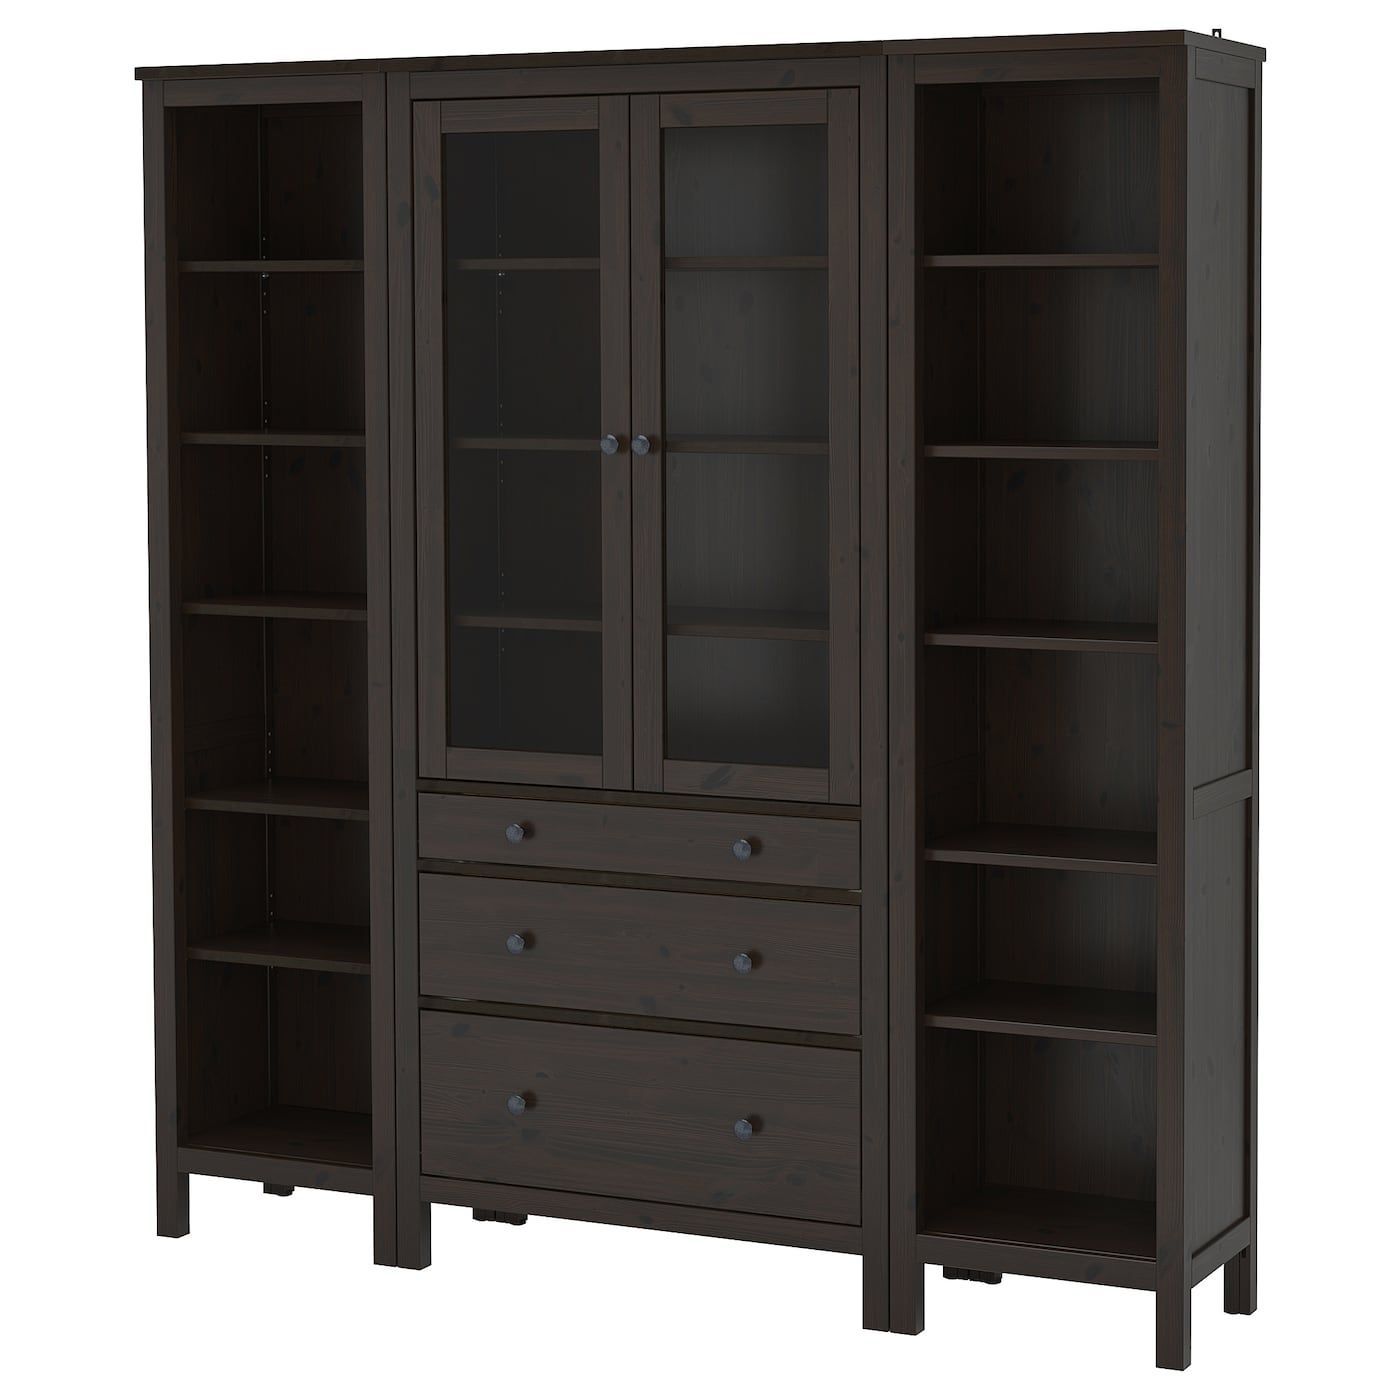 Hemnes Storage Combination W Doors/drawers, Black Brown For Dark Brown Tv Cabinets With 2 Sliding Doors And Drawer (View 14 of 15)